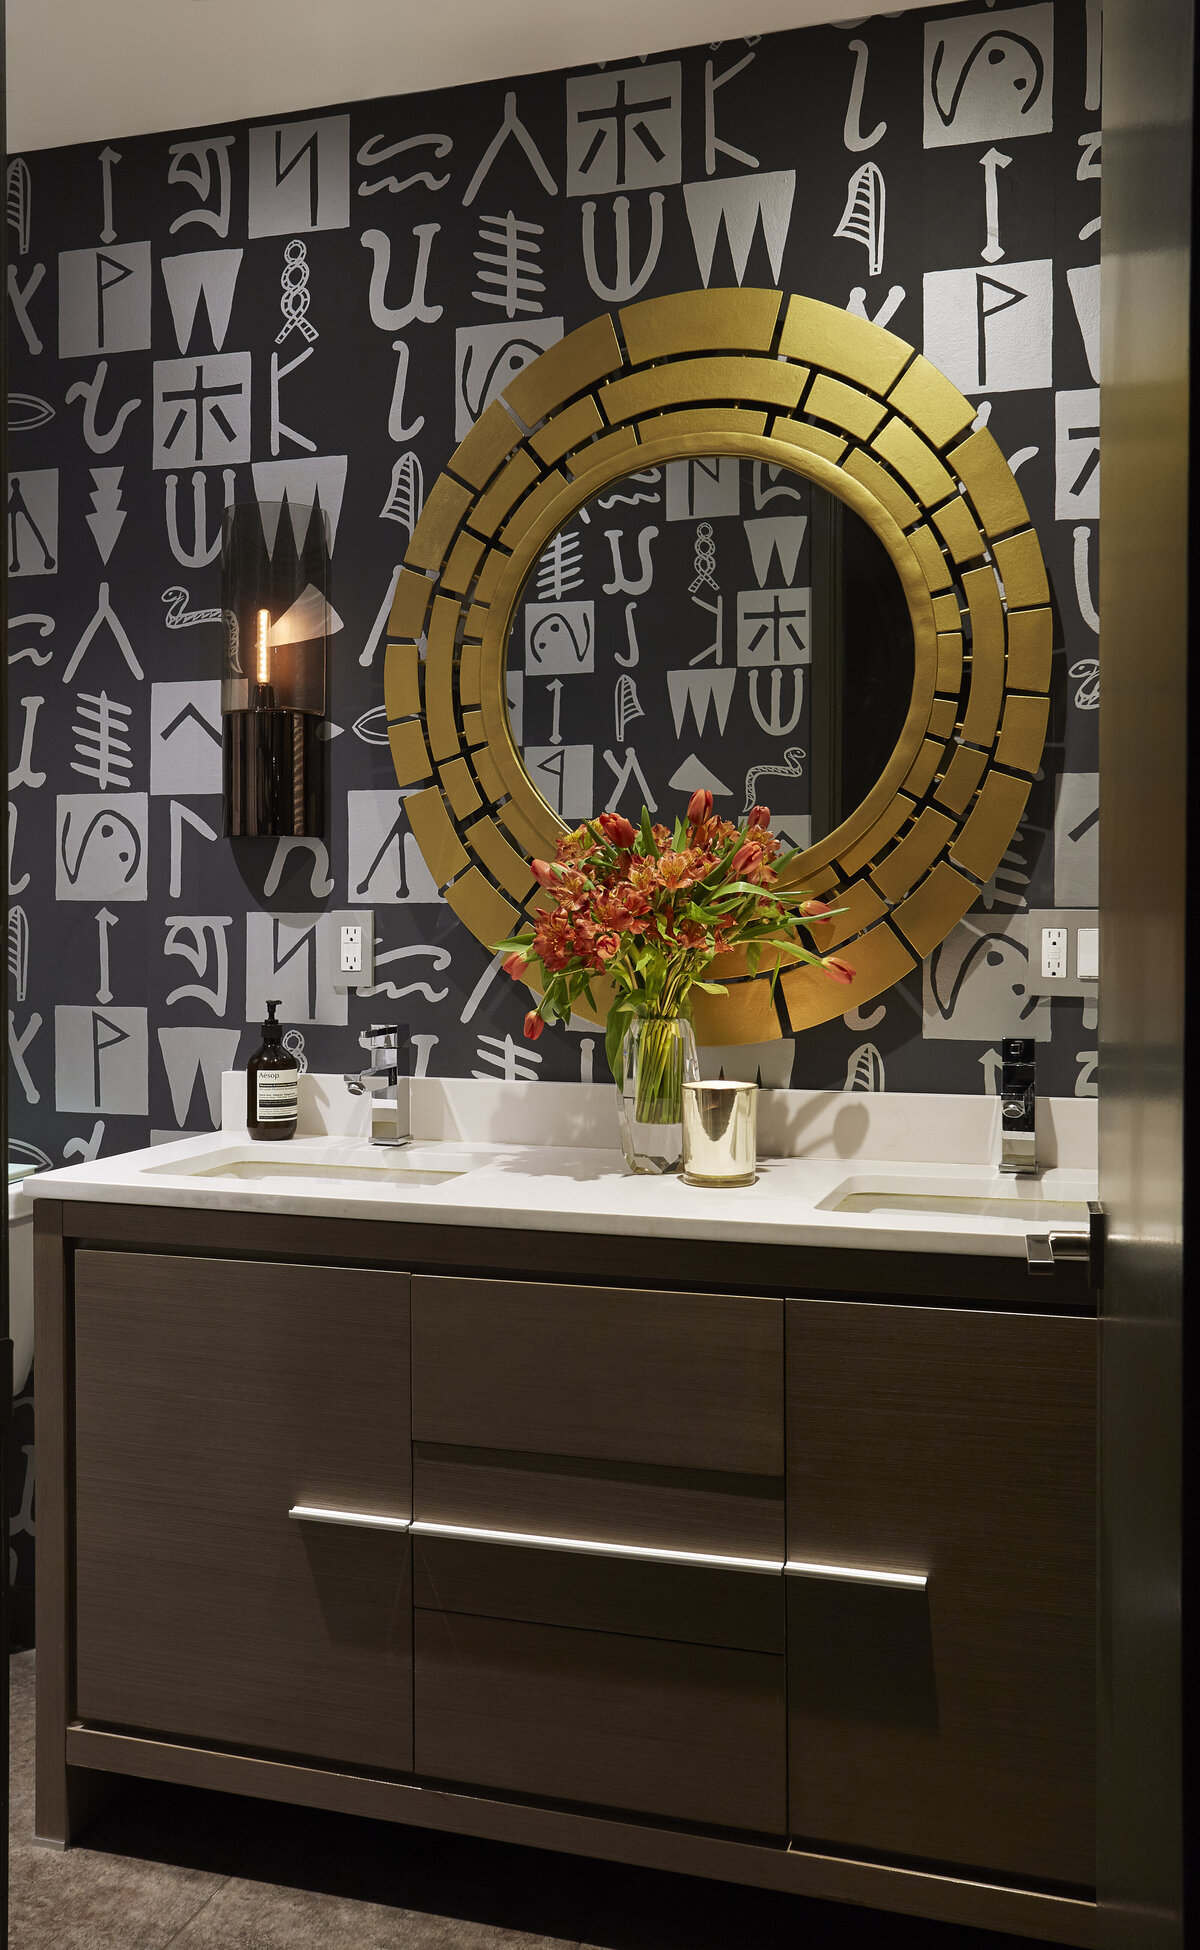 seamless pattern bathroom wall tile with mirror + classic counter cabinets